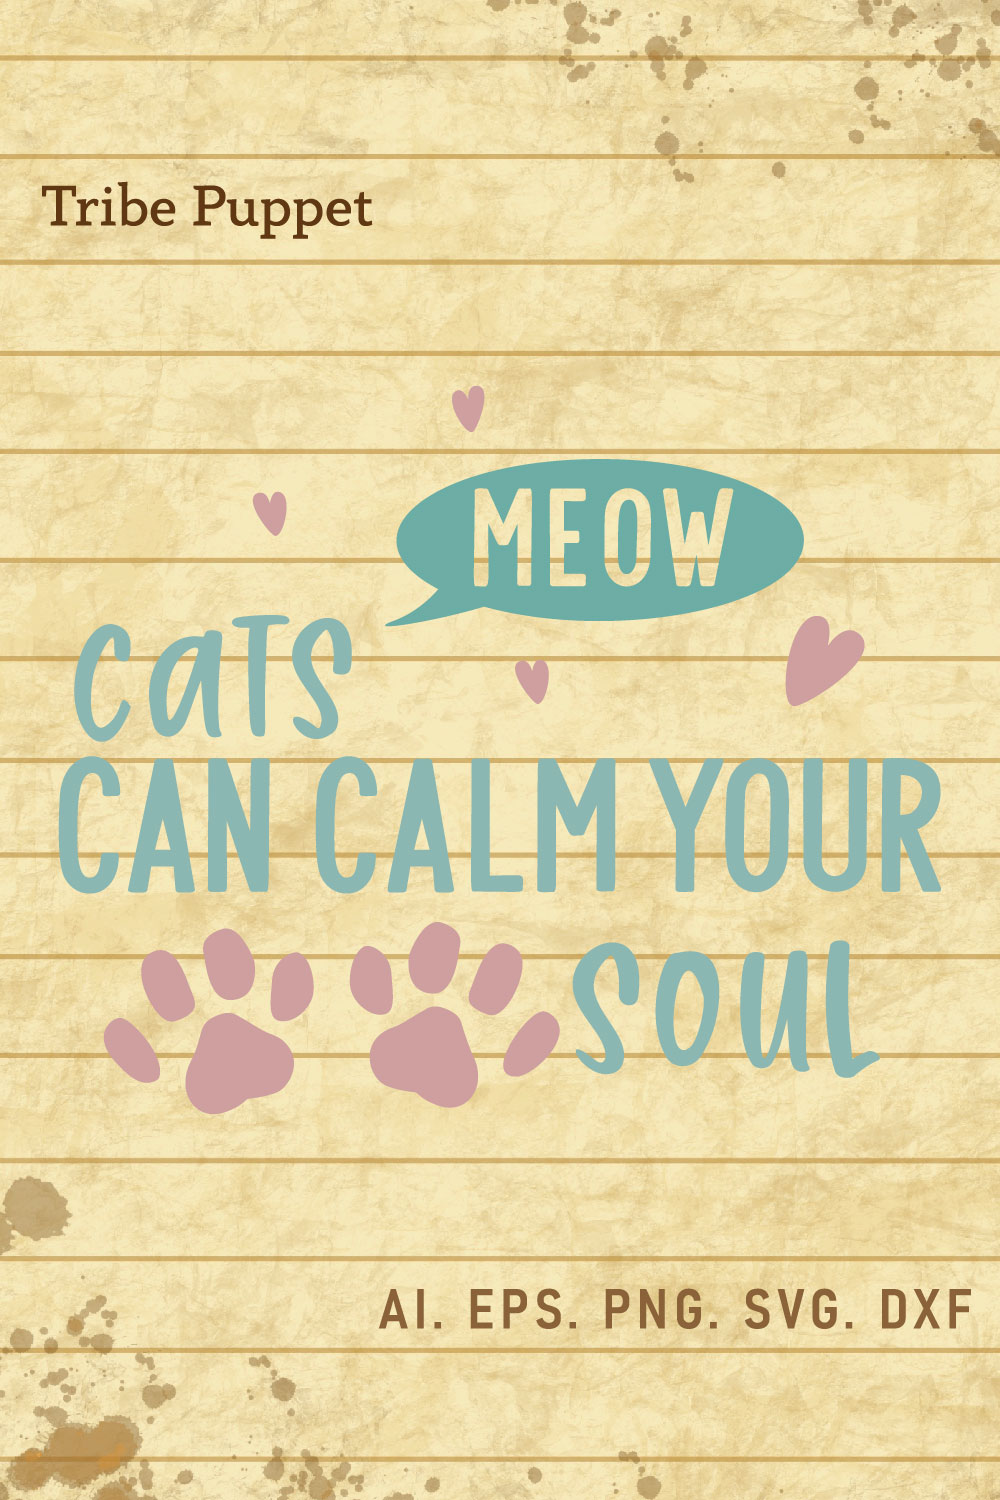 Cat Quotes pinterest preview image.